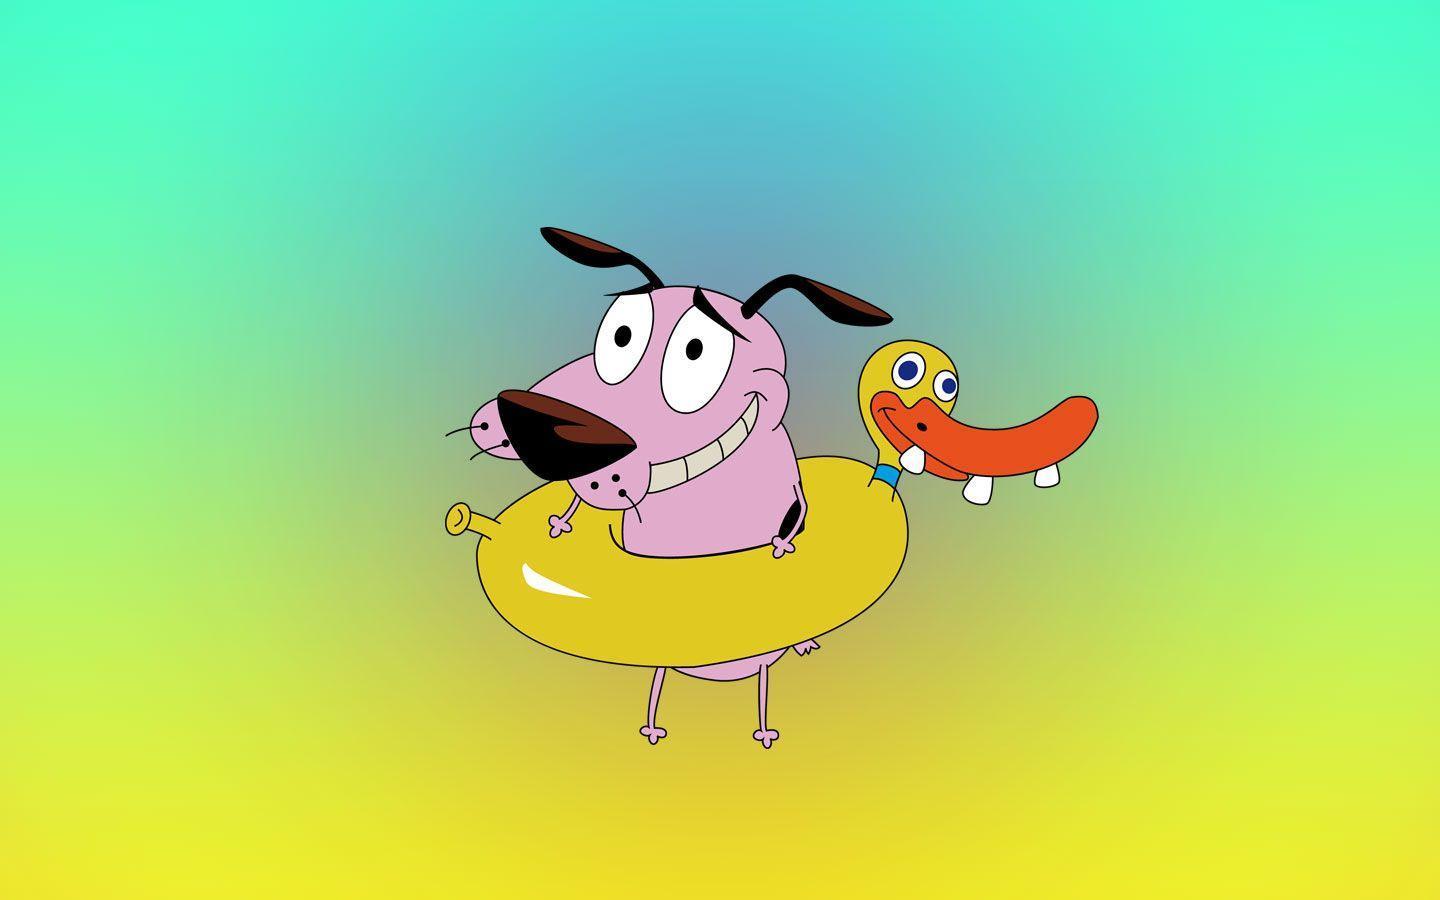 Courage the Cowardly Dog. HD Wallpaper (High Definition). Free